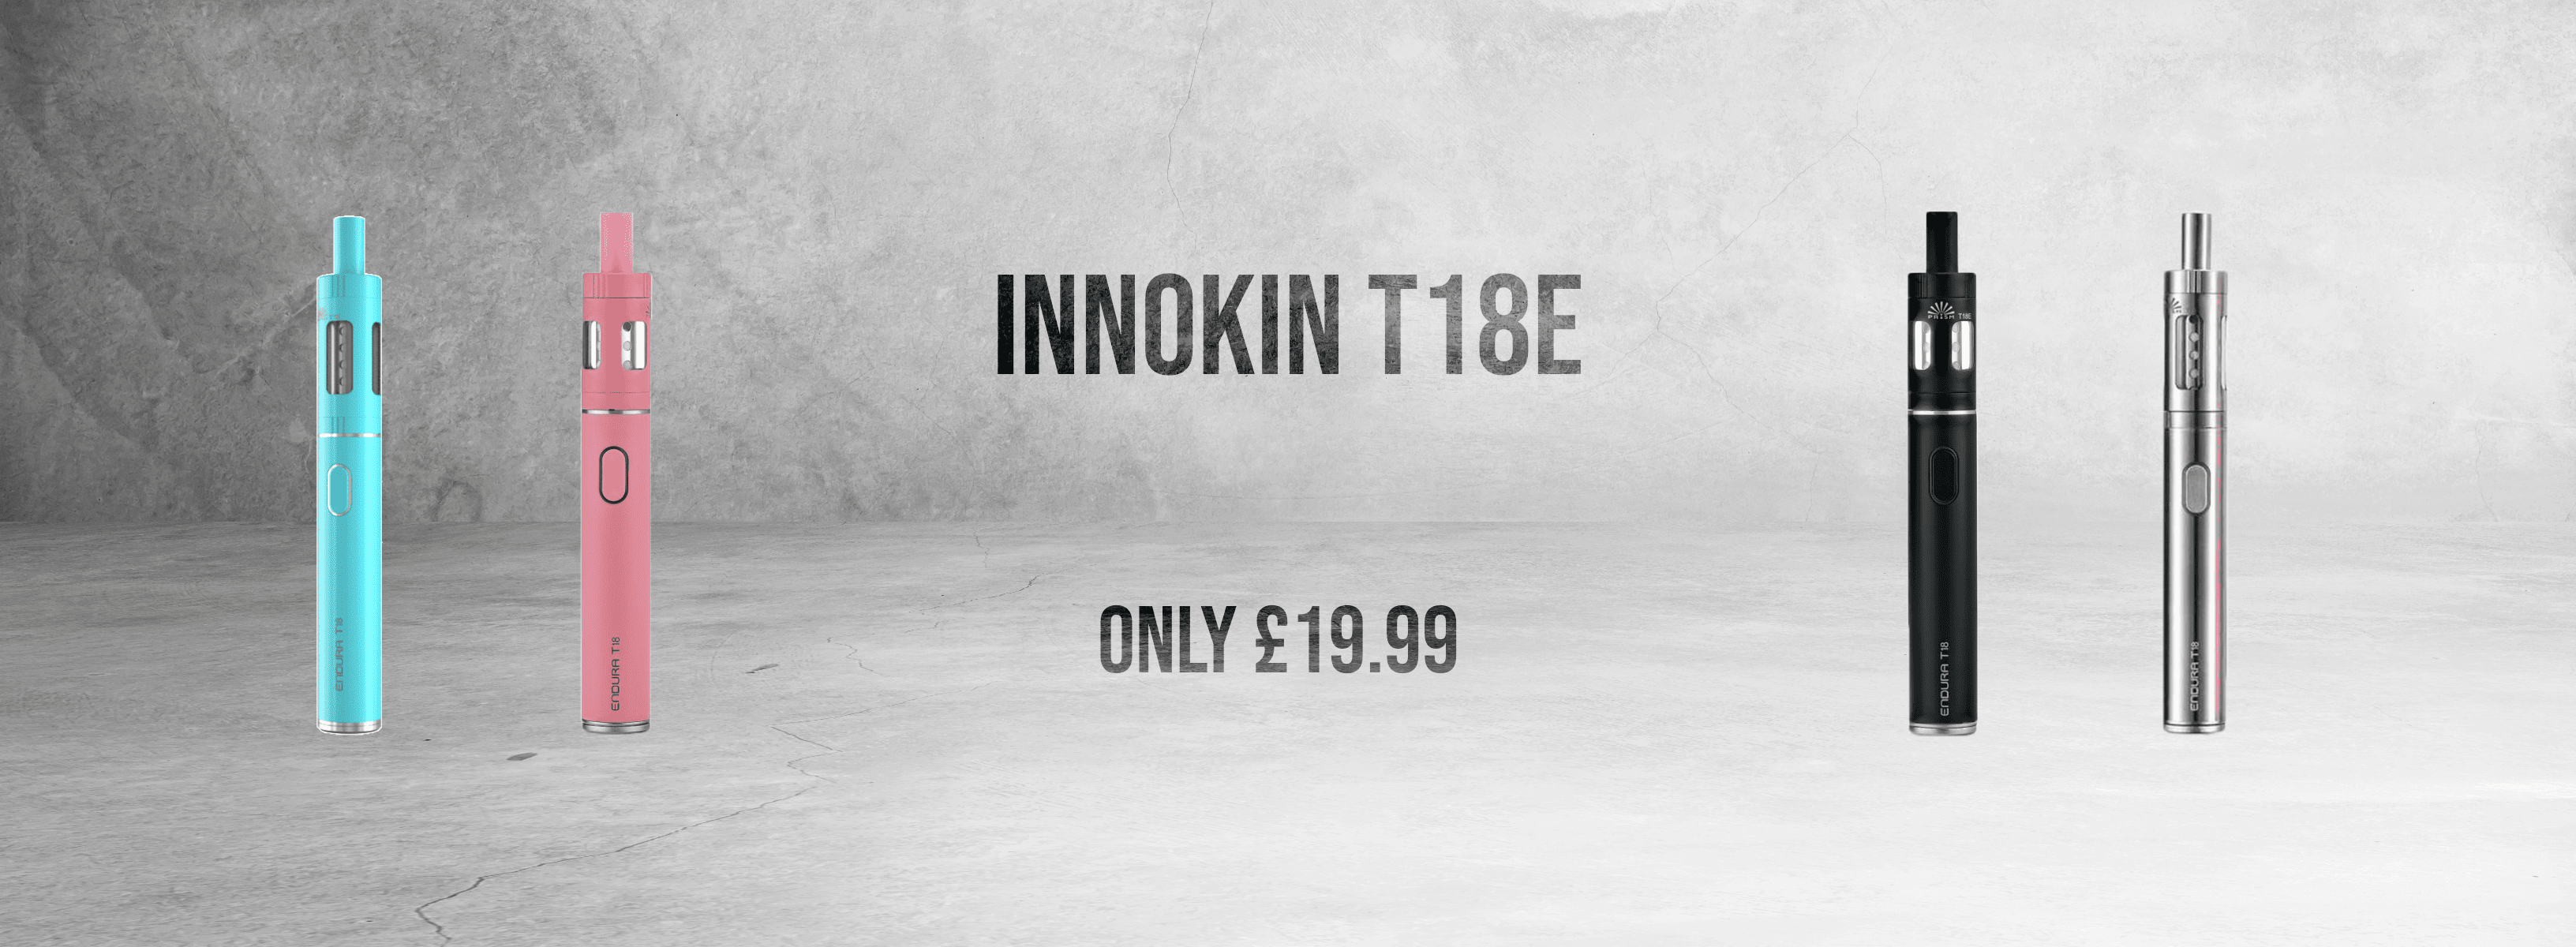 Advert for the Innokin T18E